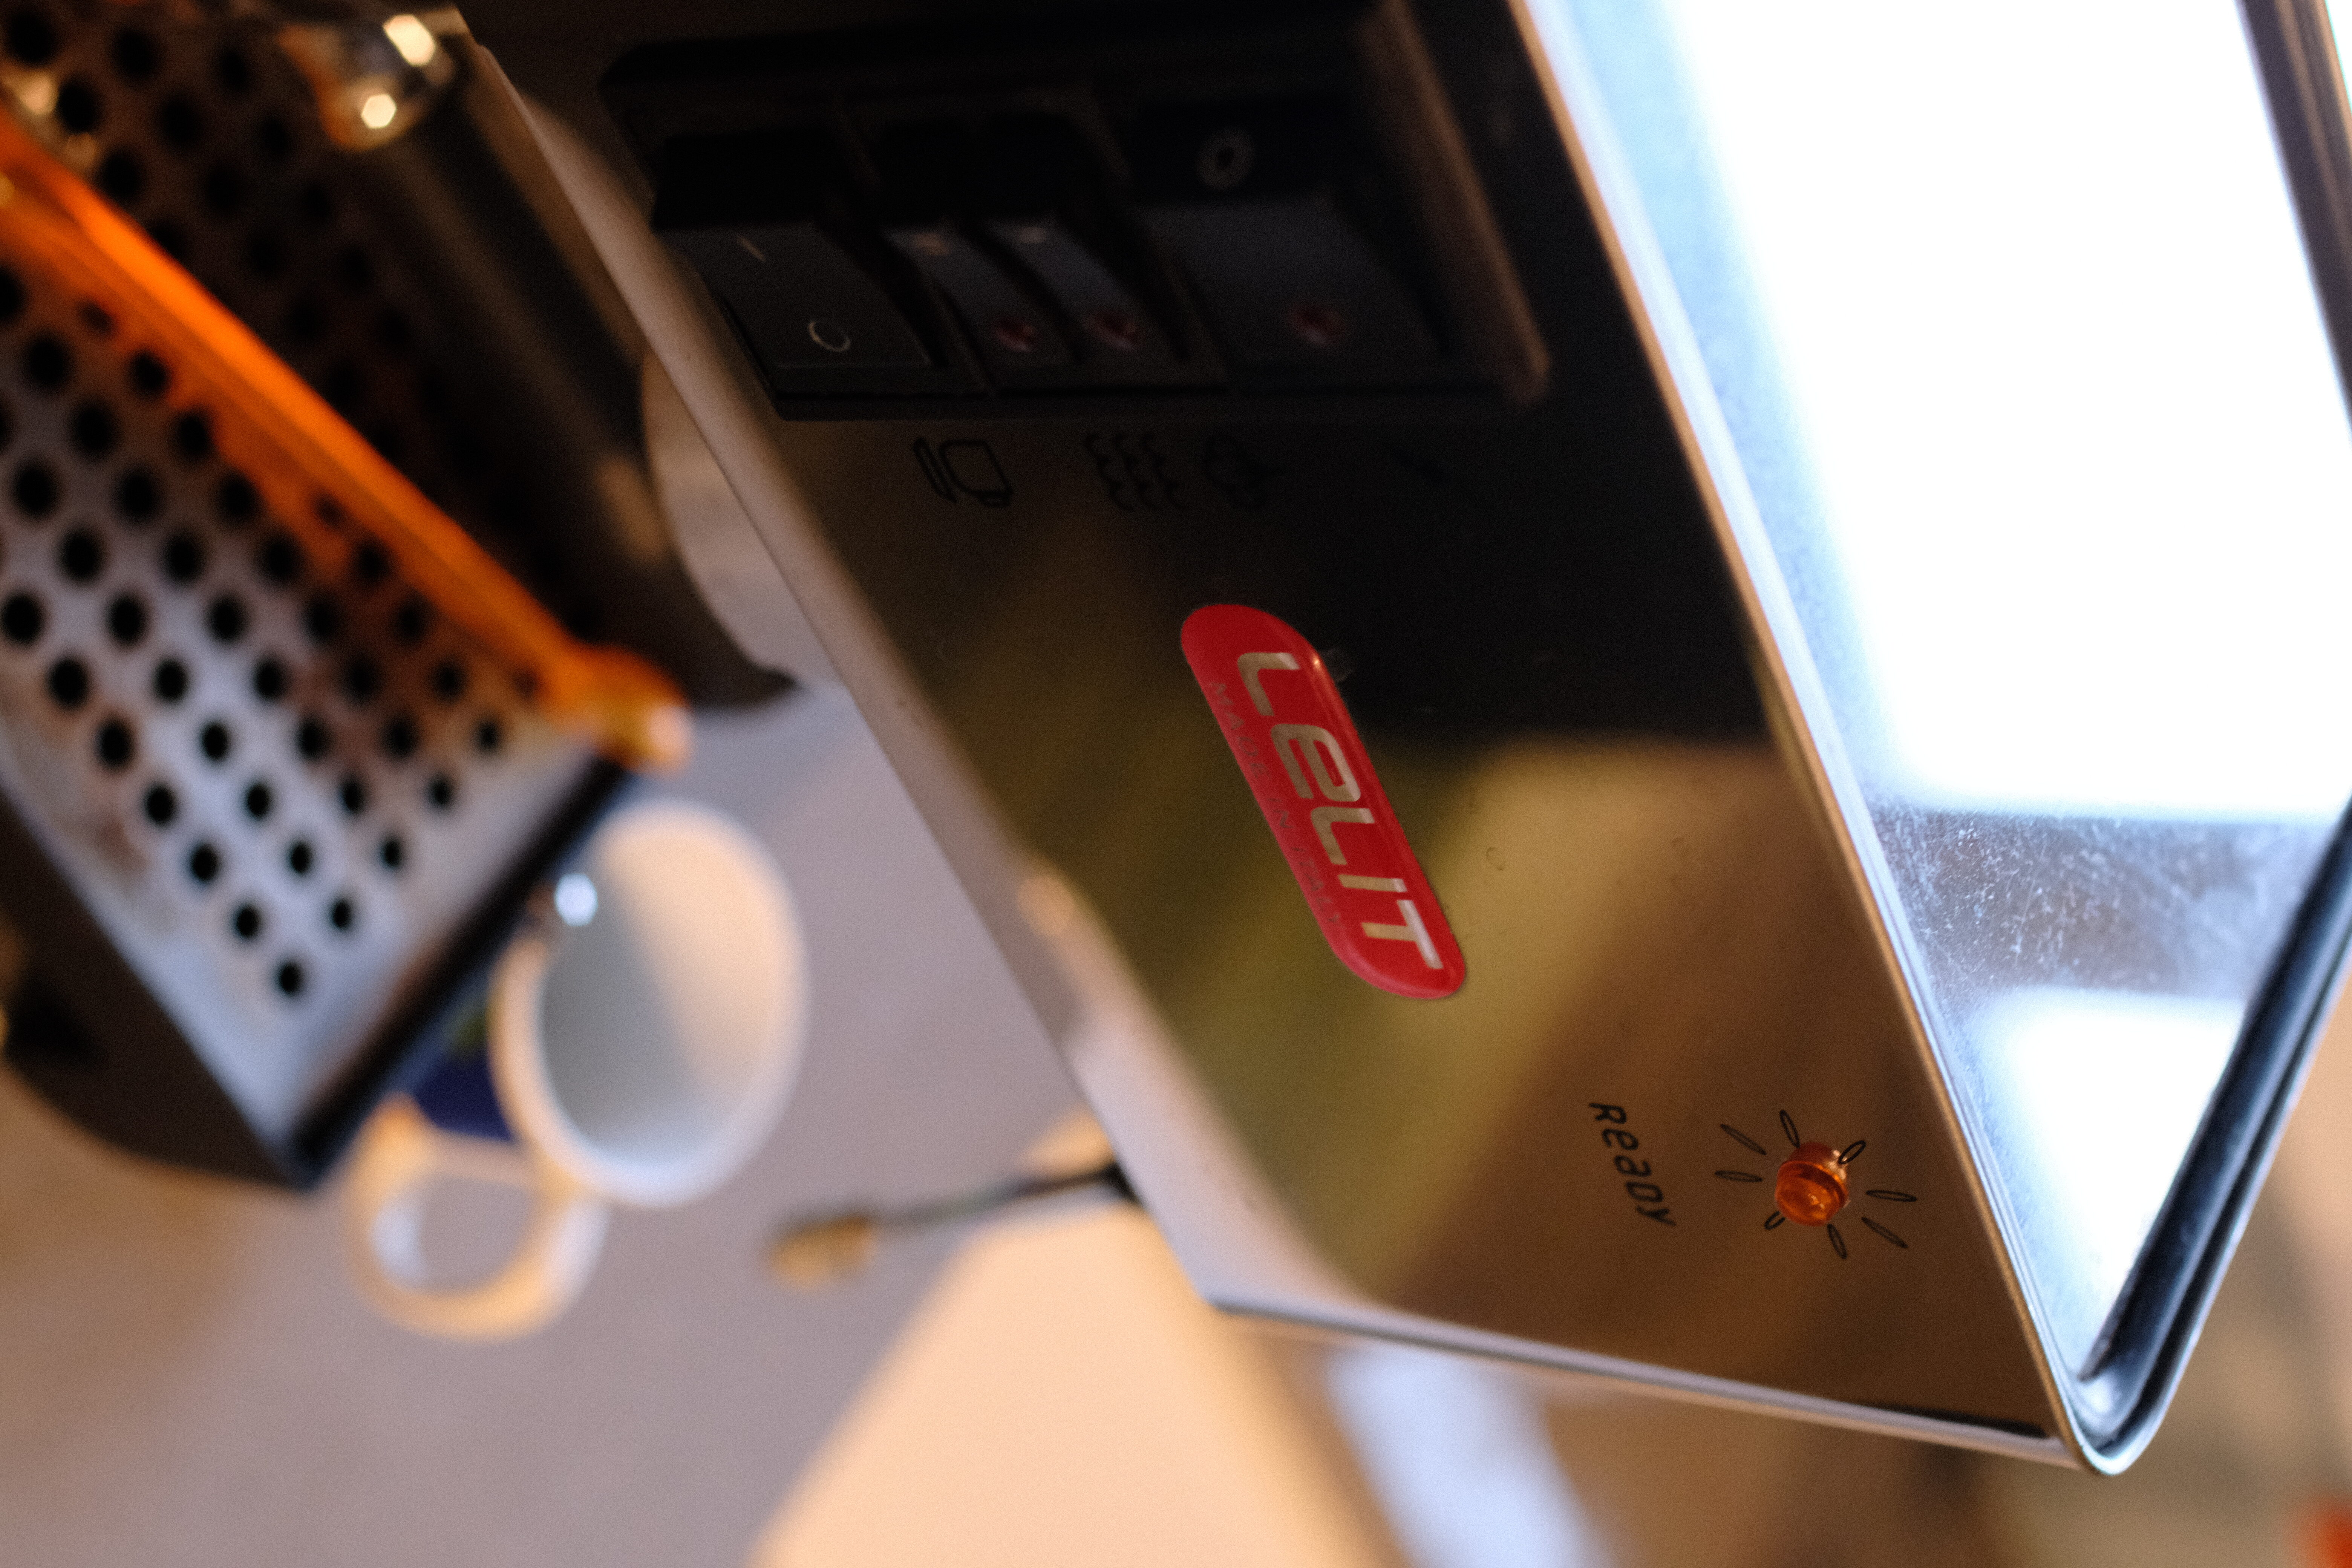 A Lelit espresso machine photographed at an angle and showing a narrow depth of field with a blurred, small cup beside it.